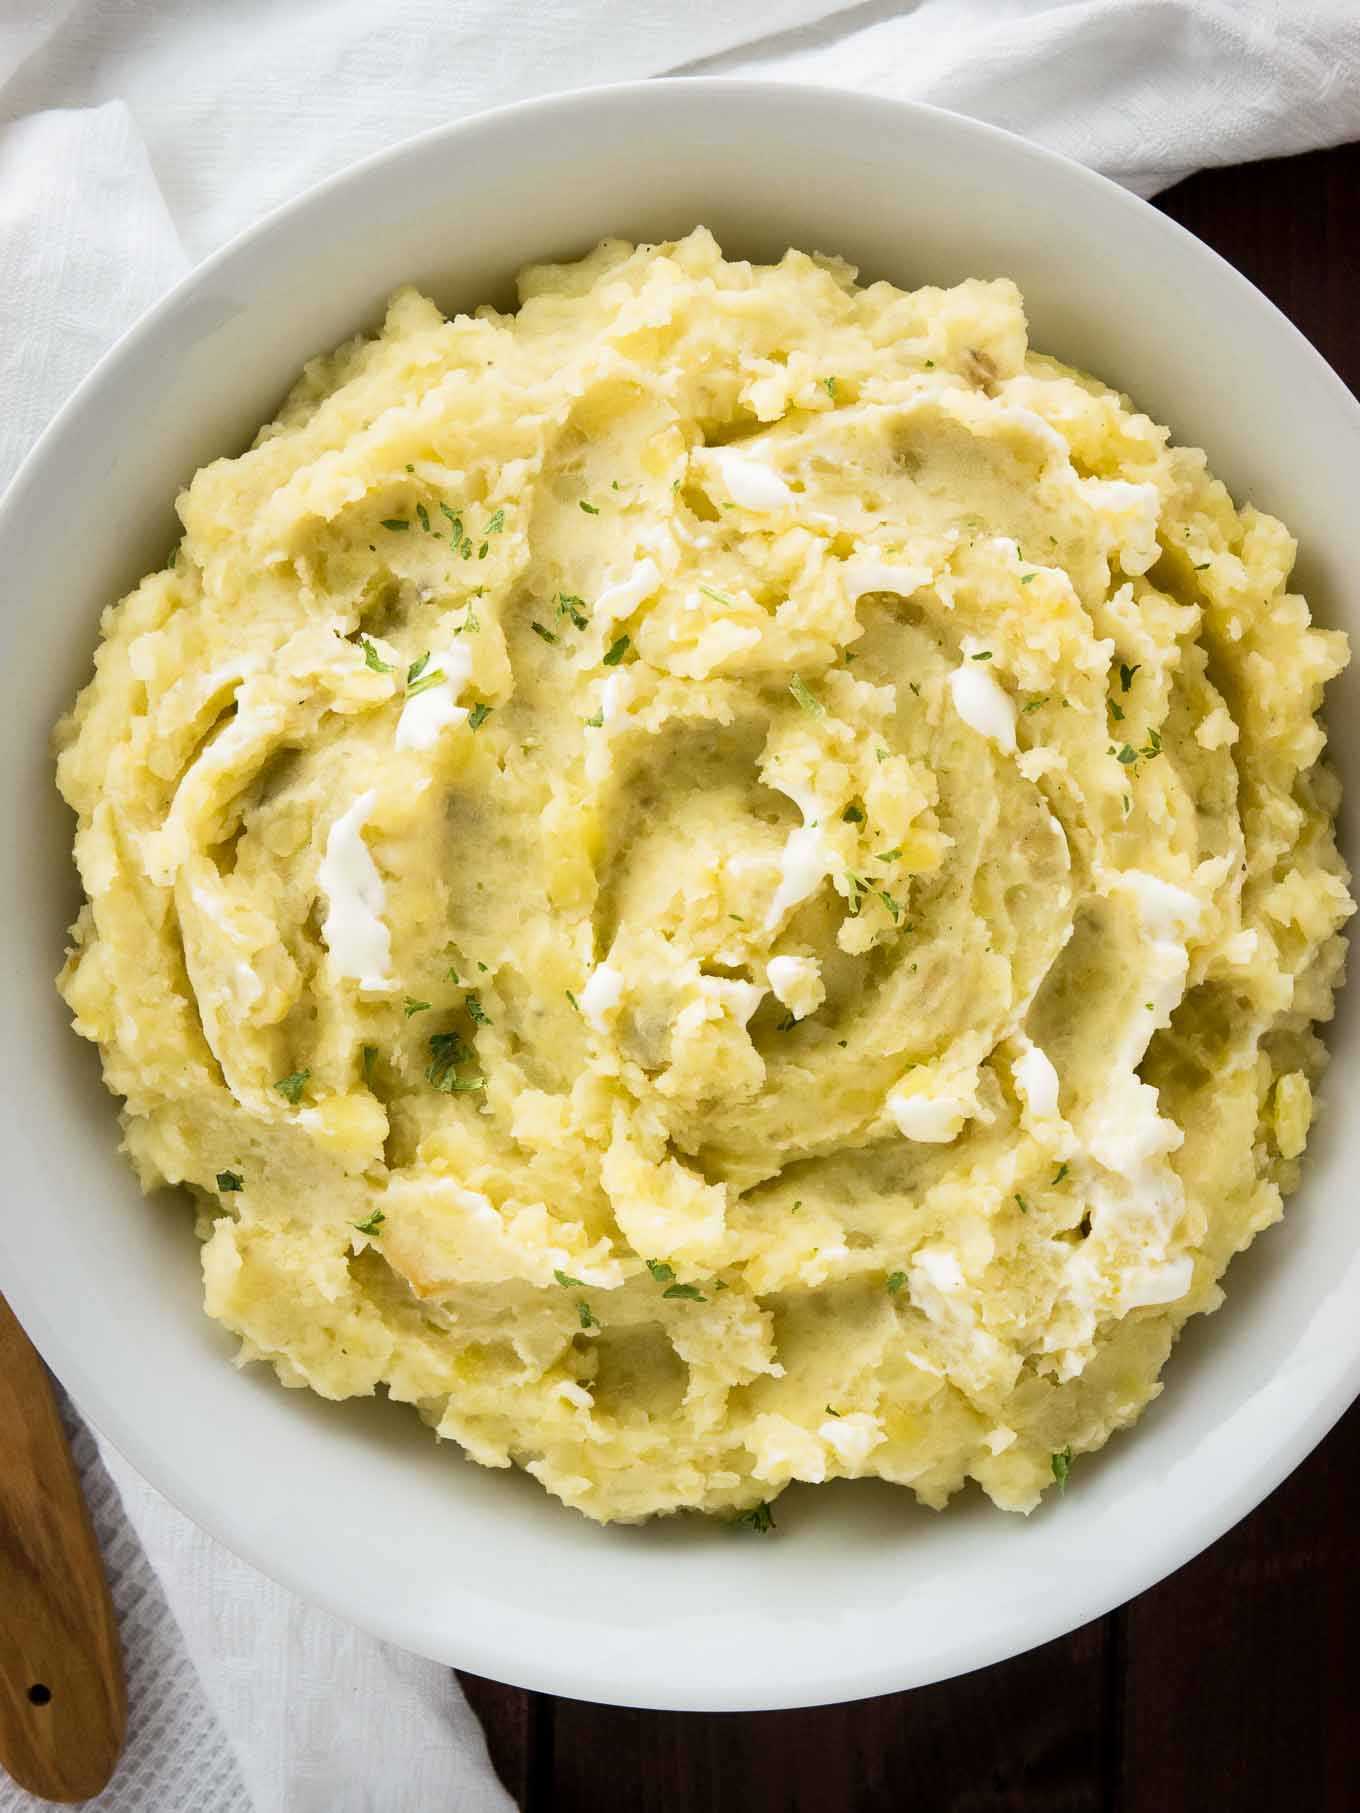 This Creamy Crock Pot Mashed Potatoes Recipe is SO easy and perfect to make ahead! A delicious slow cooker side dish for any meal throughout the fall and winter.